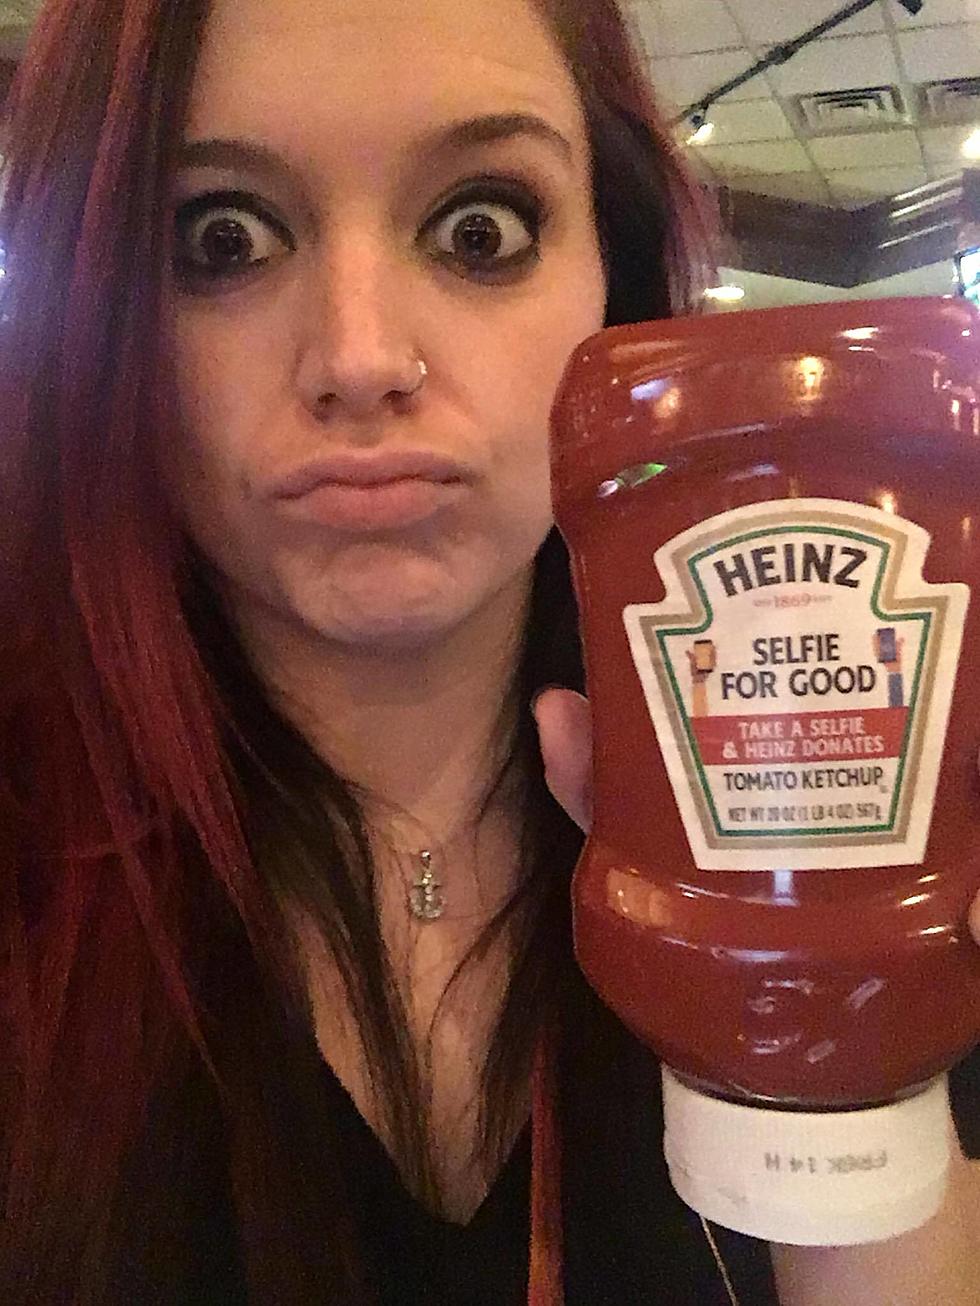 Why Taking a Selfie With a Ketchup Bottle is a Good Idea!